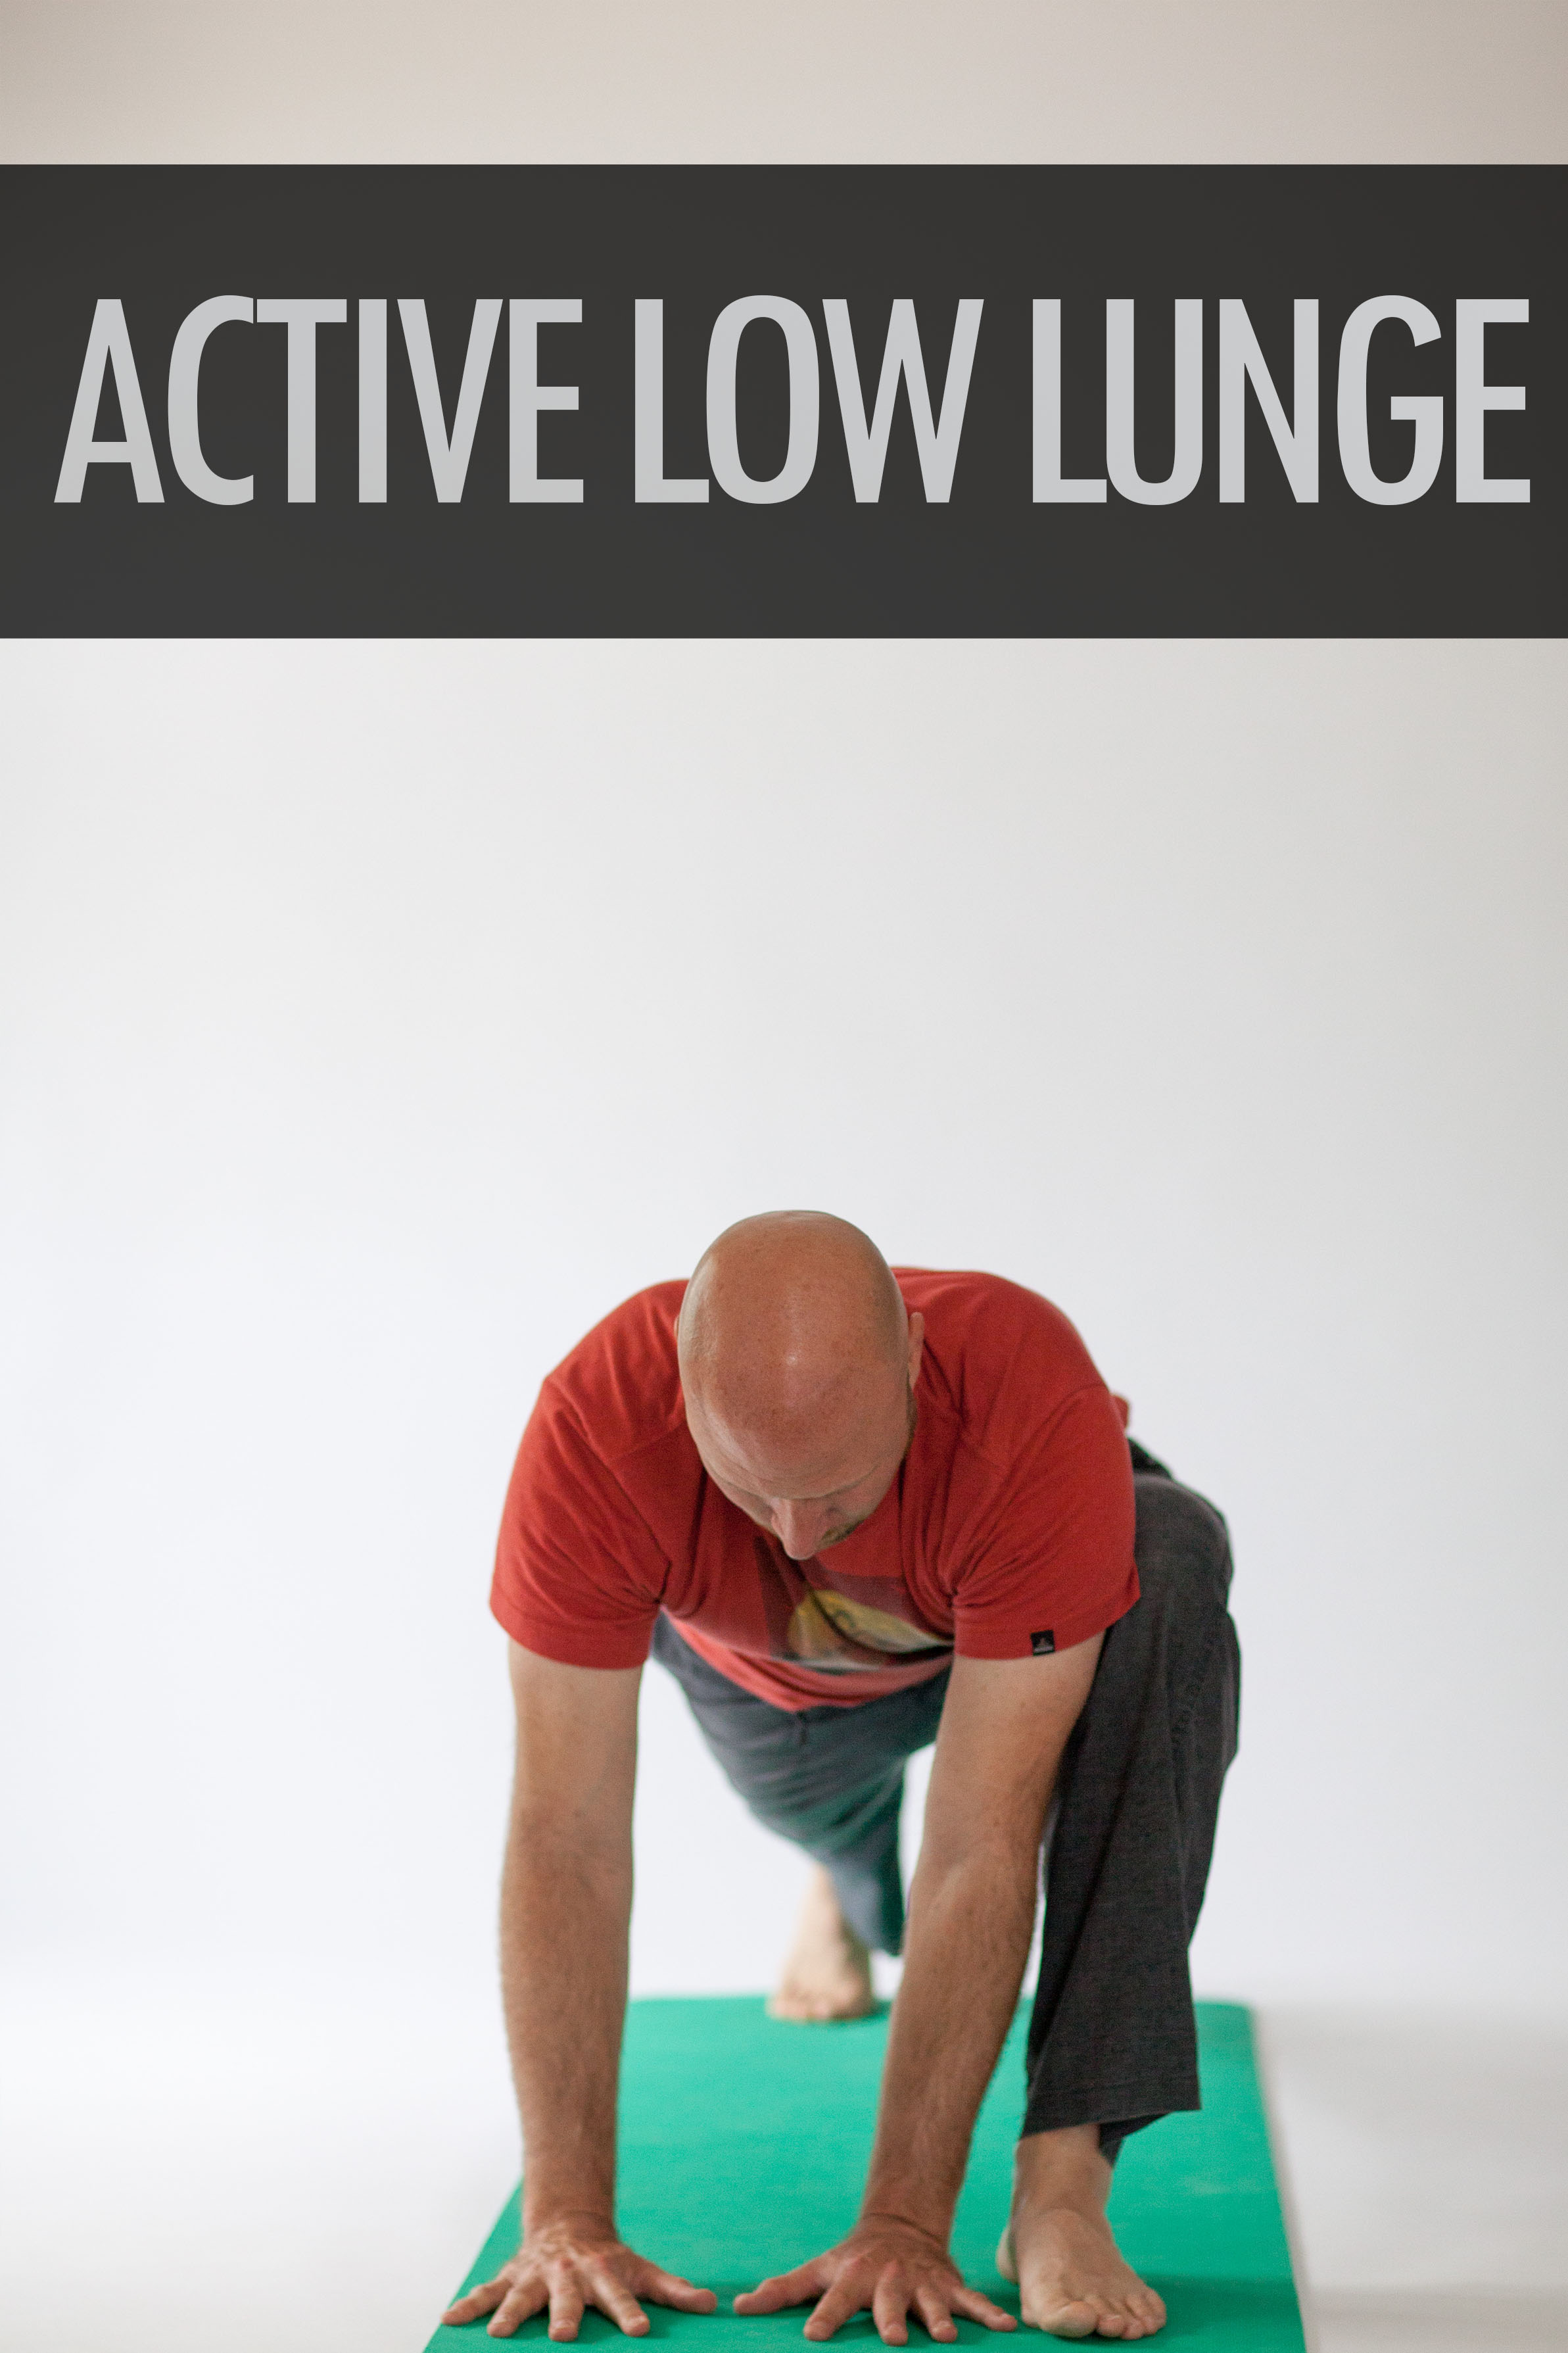 Active Low Lunge.jpg